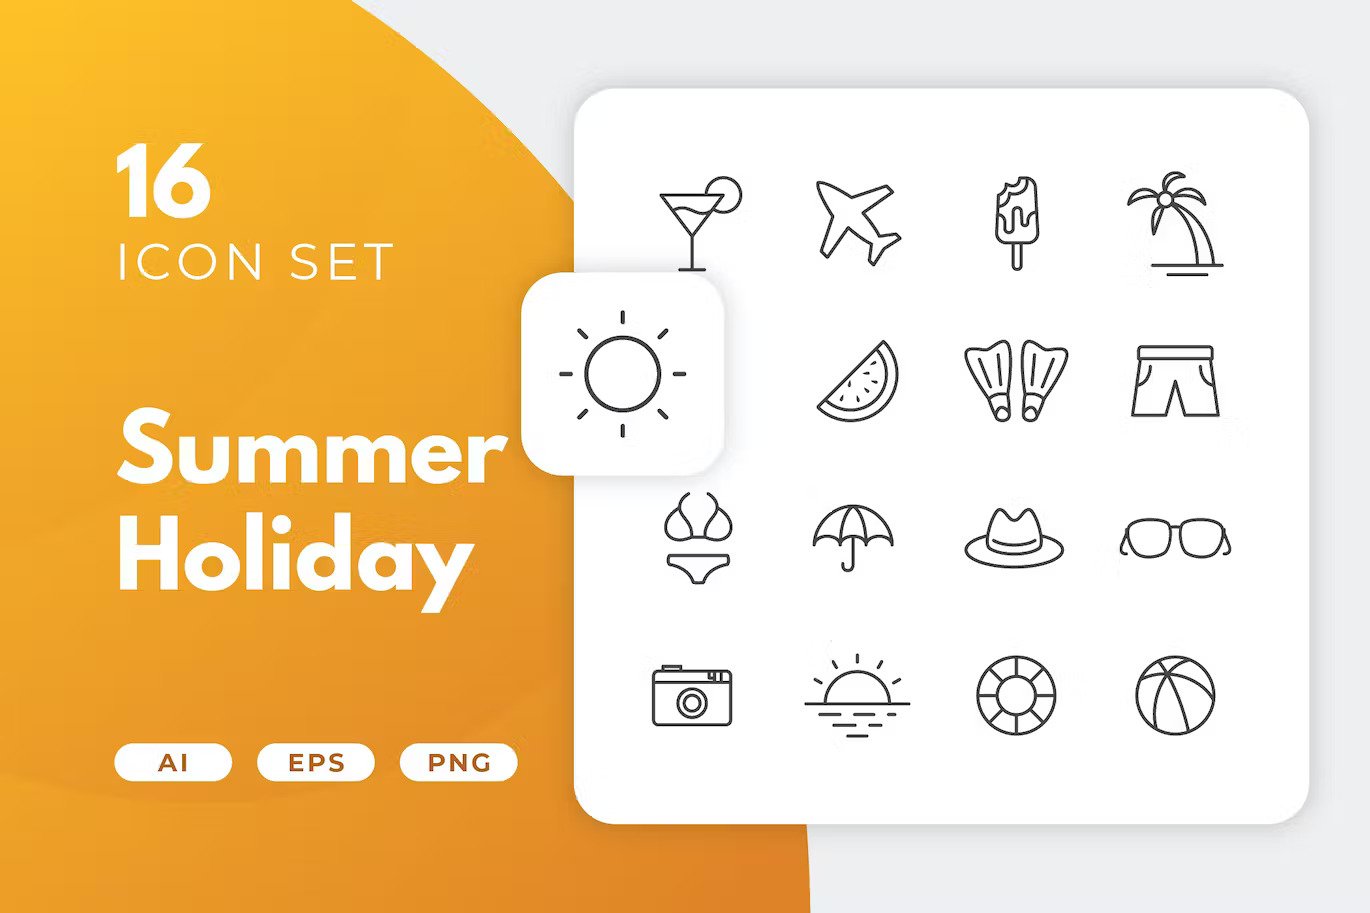 A summer holiday icons